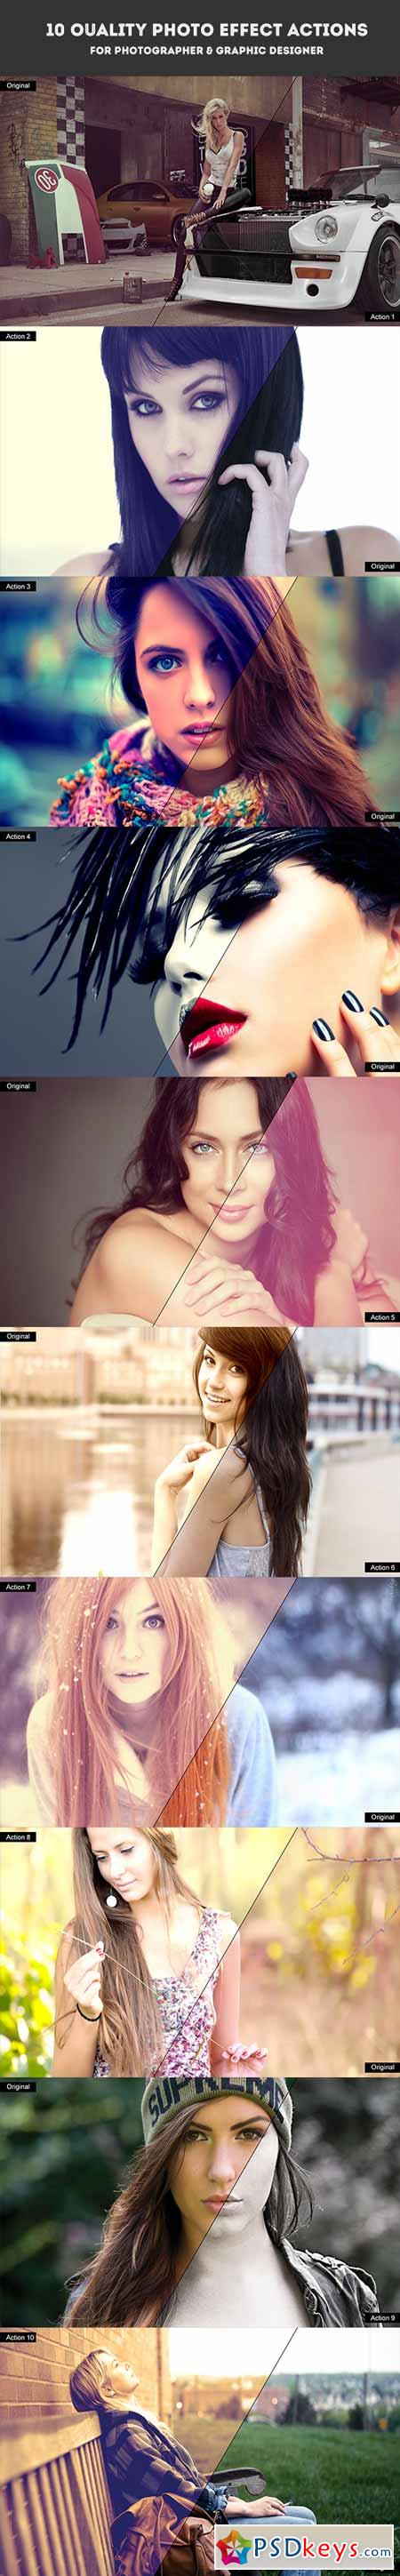 10 Quality Photo Effect Actions Photoshop 7226406